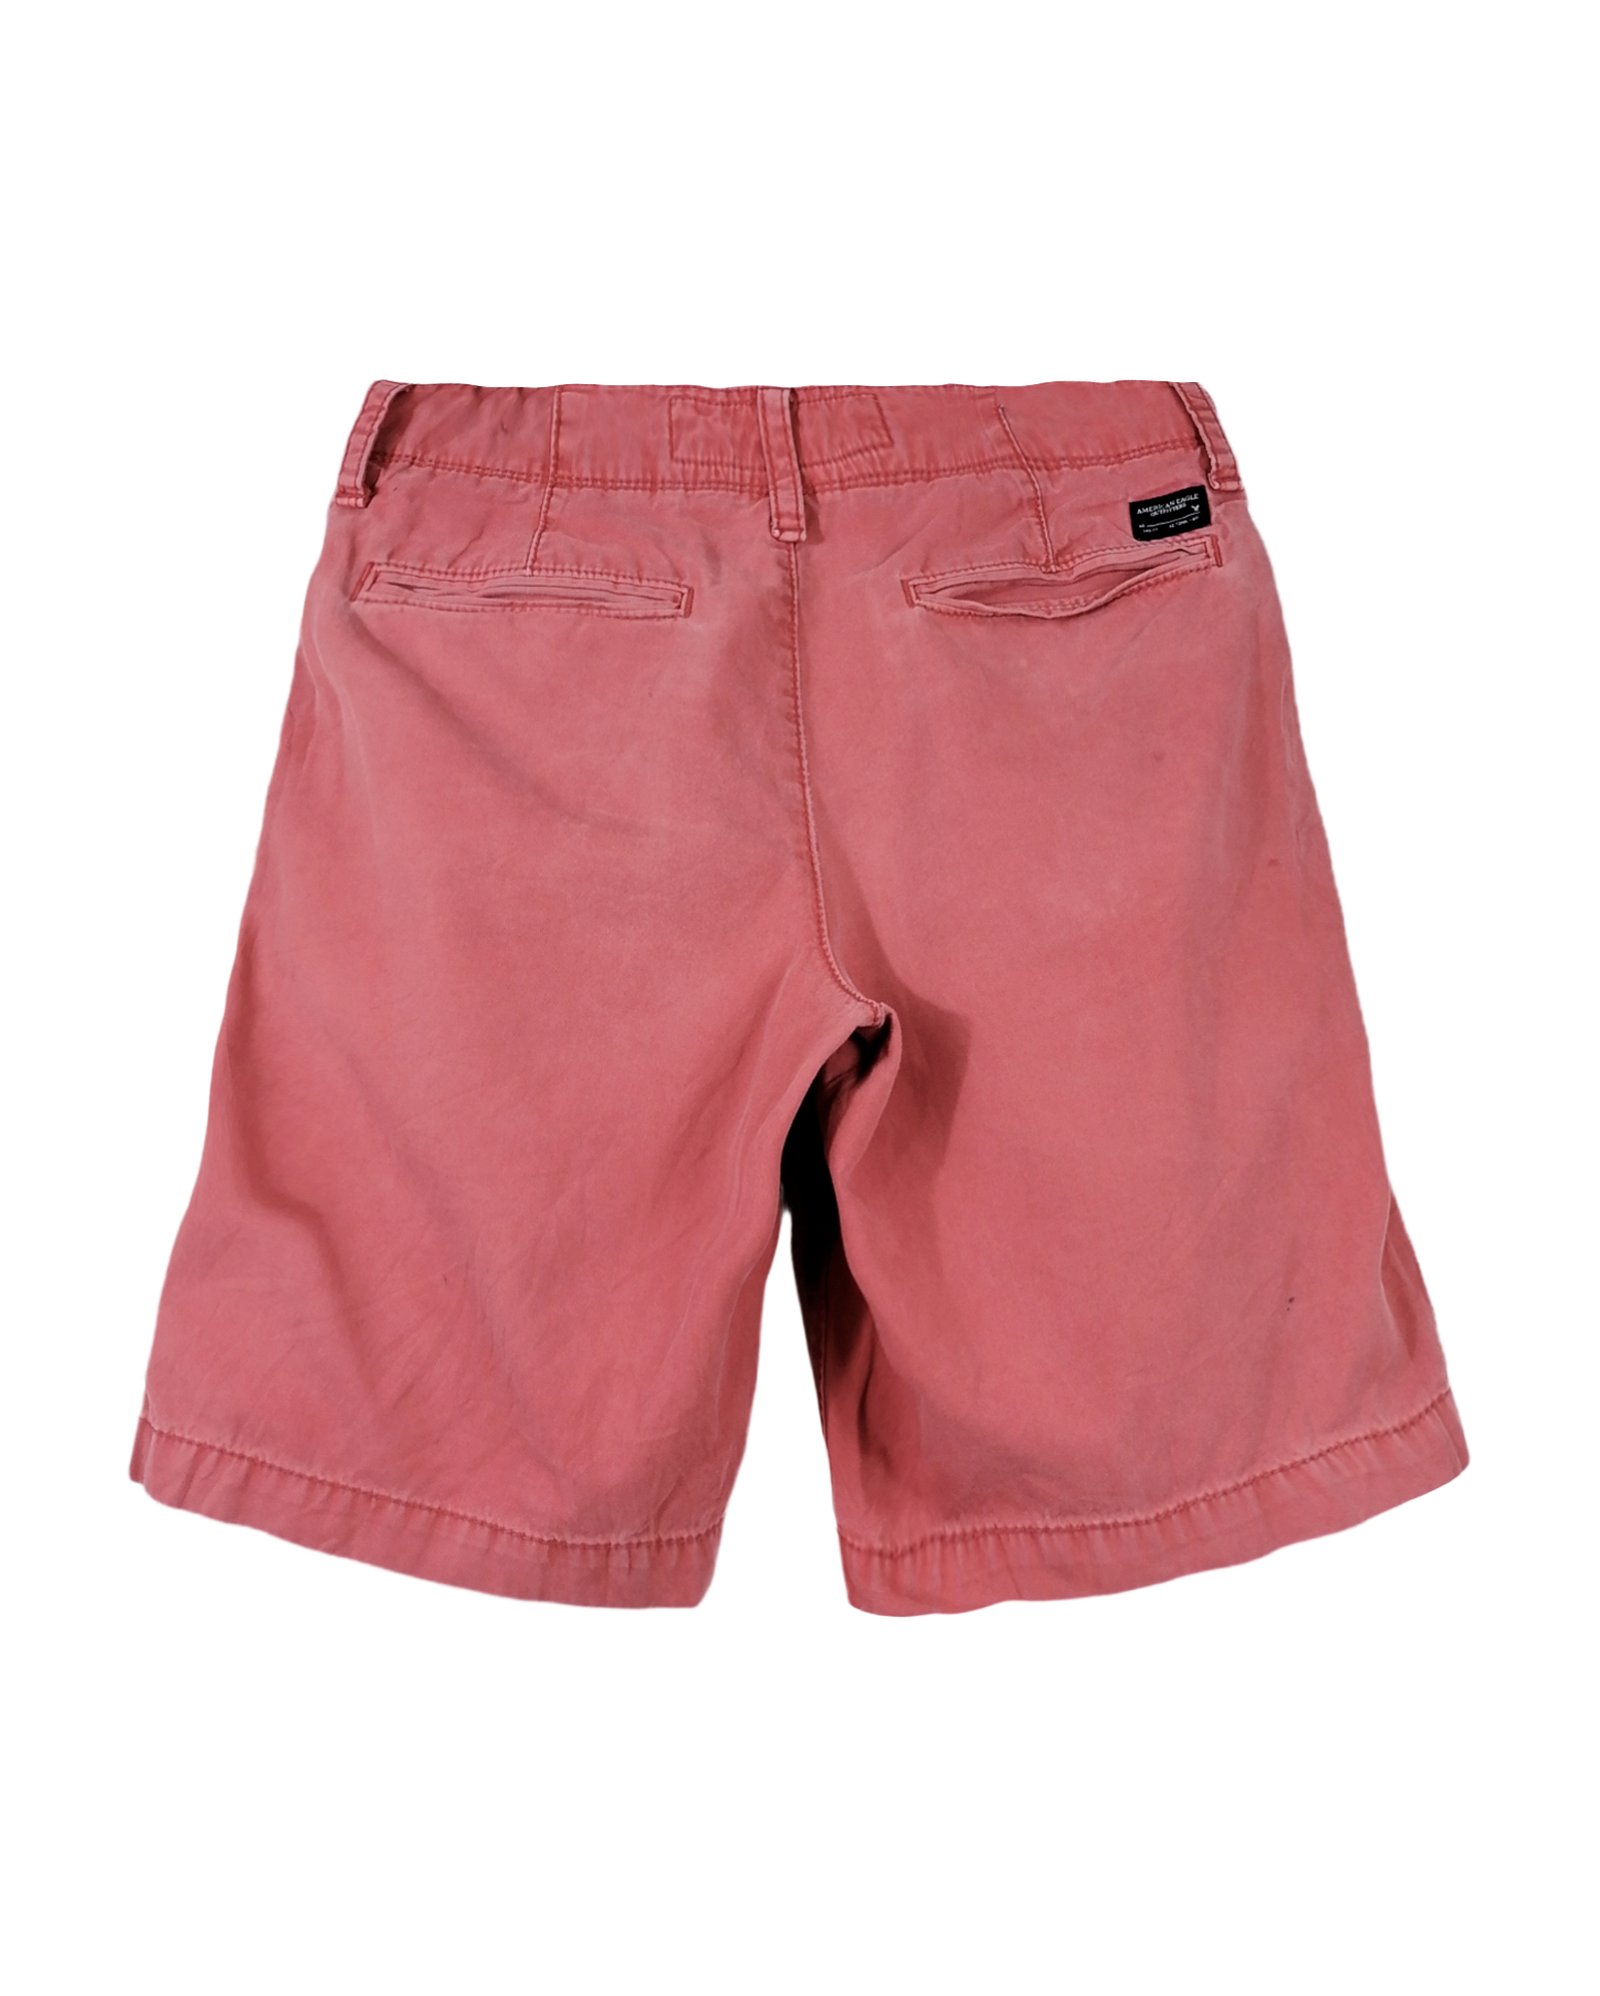 Shorts Casuales 2